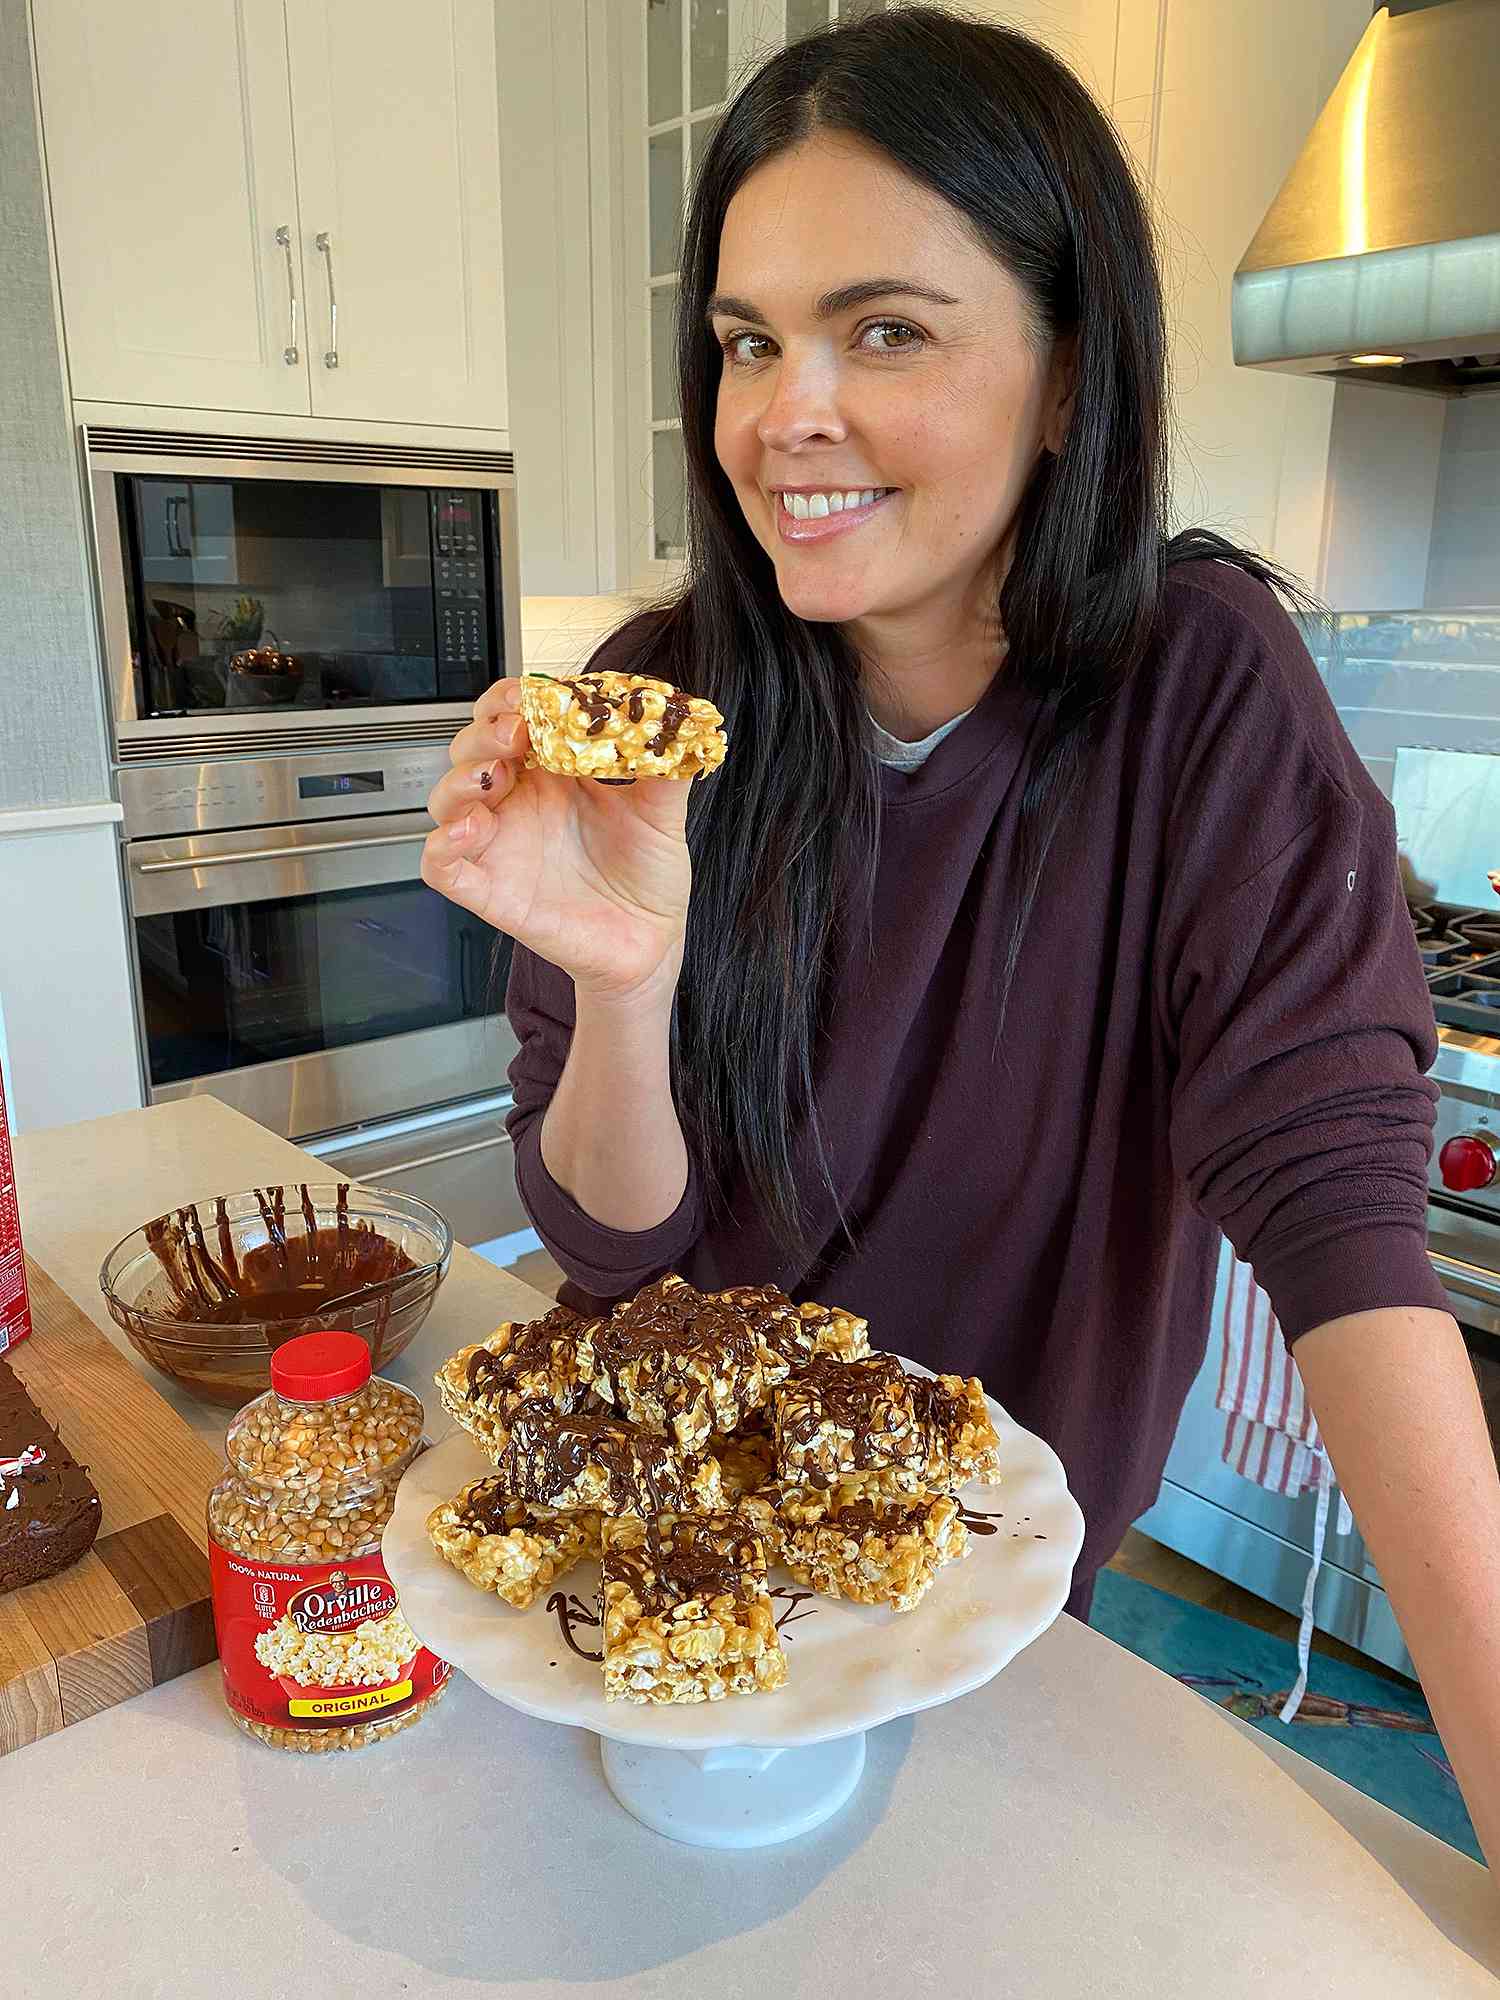 Katie Lee on Her First Thanksgiving with Daughter: 'Going to Try to Make It as Festive as Possible'